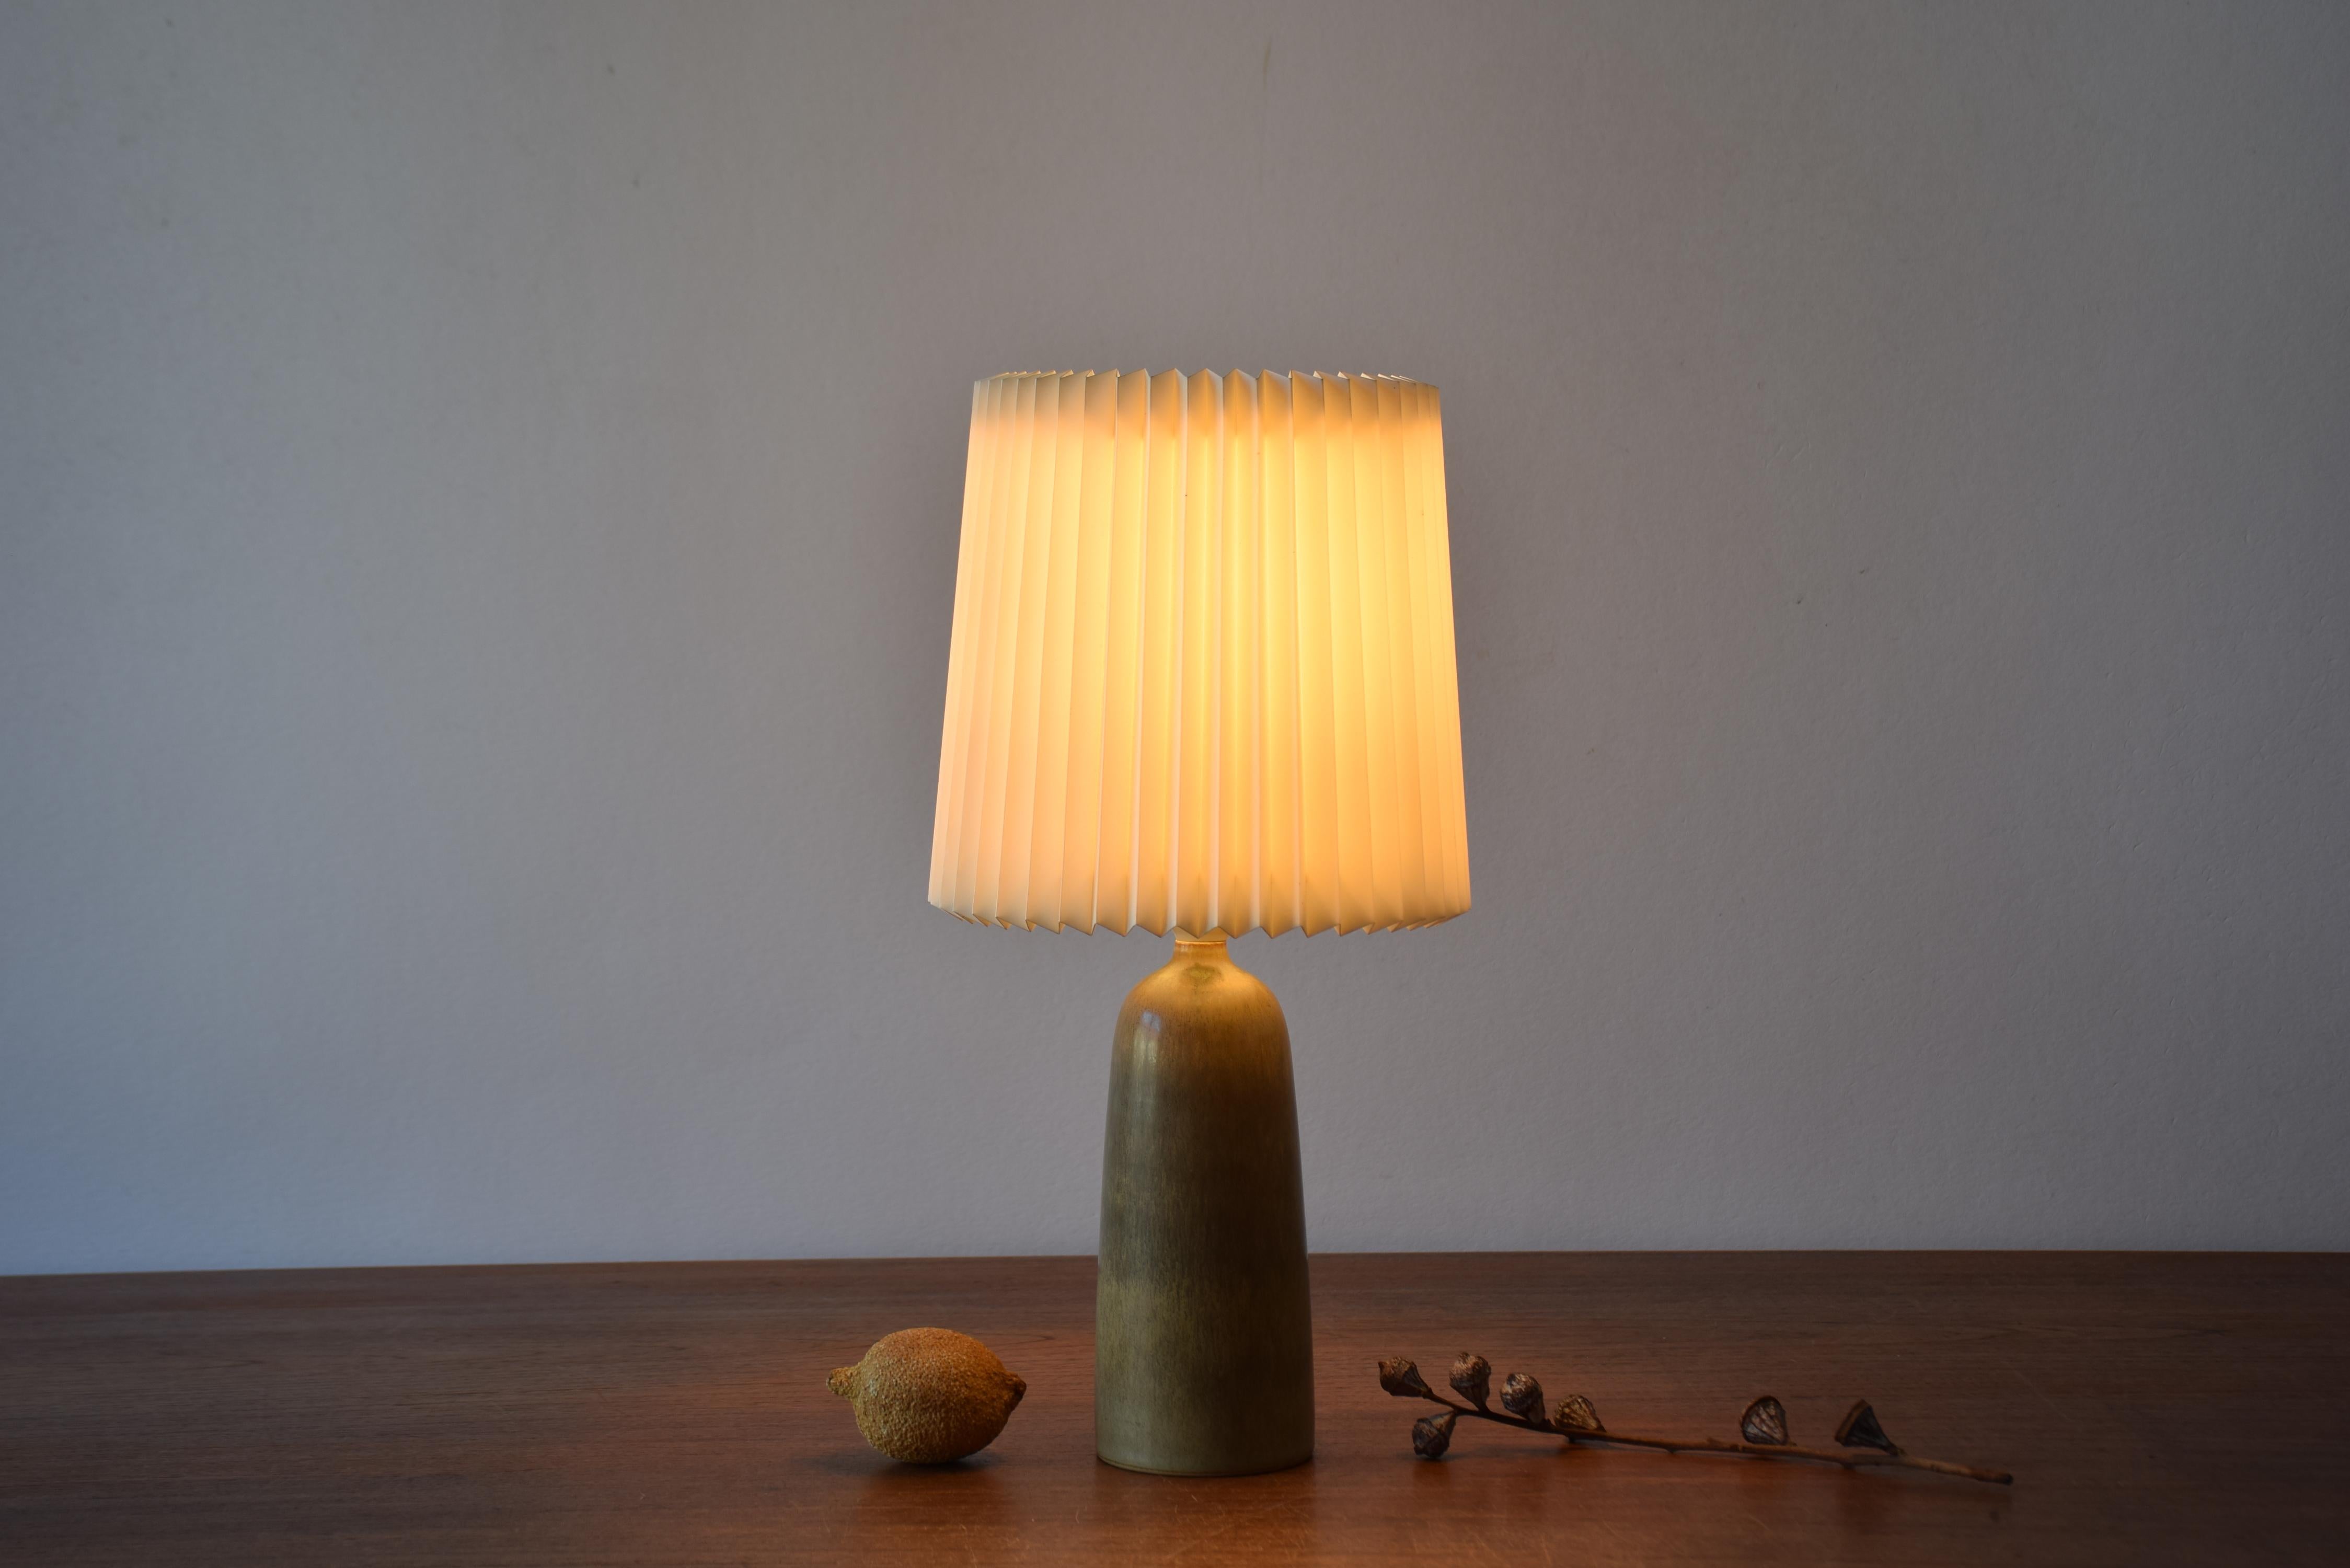 Small ceramic table lamp from Palshus Stentøj, Denmark, made circa 1960s. The lamp comes with a Classic vintage pleated lampshade from Le Klint.

The lampbase was designed by Per Linnemann-Schmidt and has a delicate haresfur glaze in brown shades